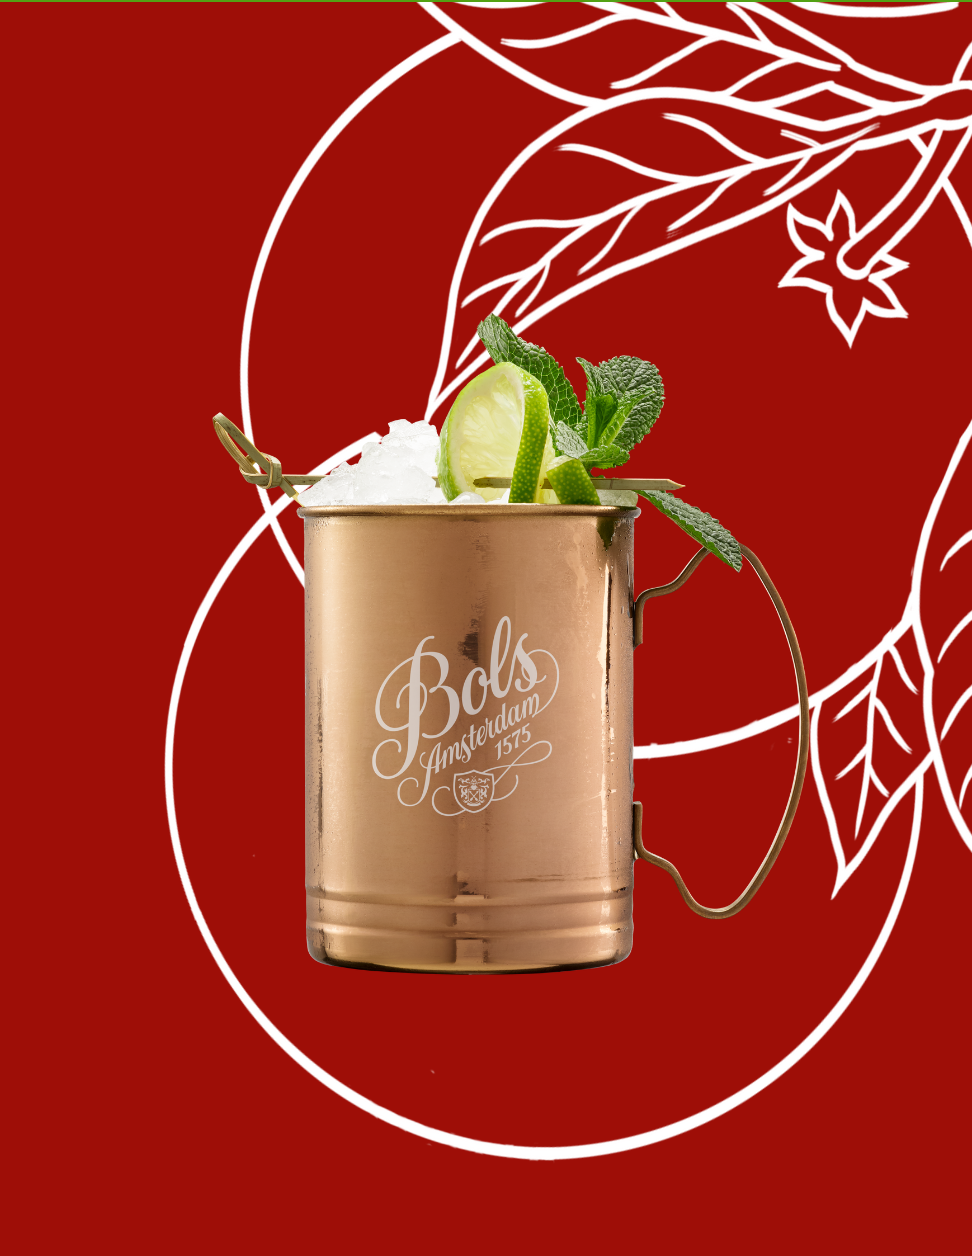 Red Orange Mule Cocktail Recipe with Bols Red Orange Products